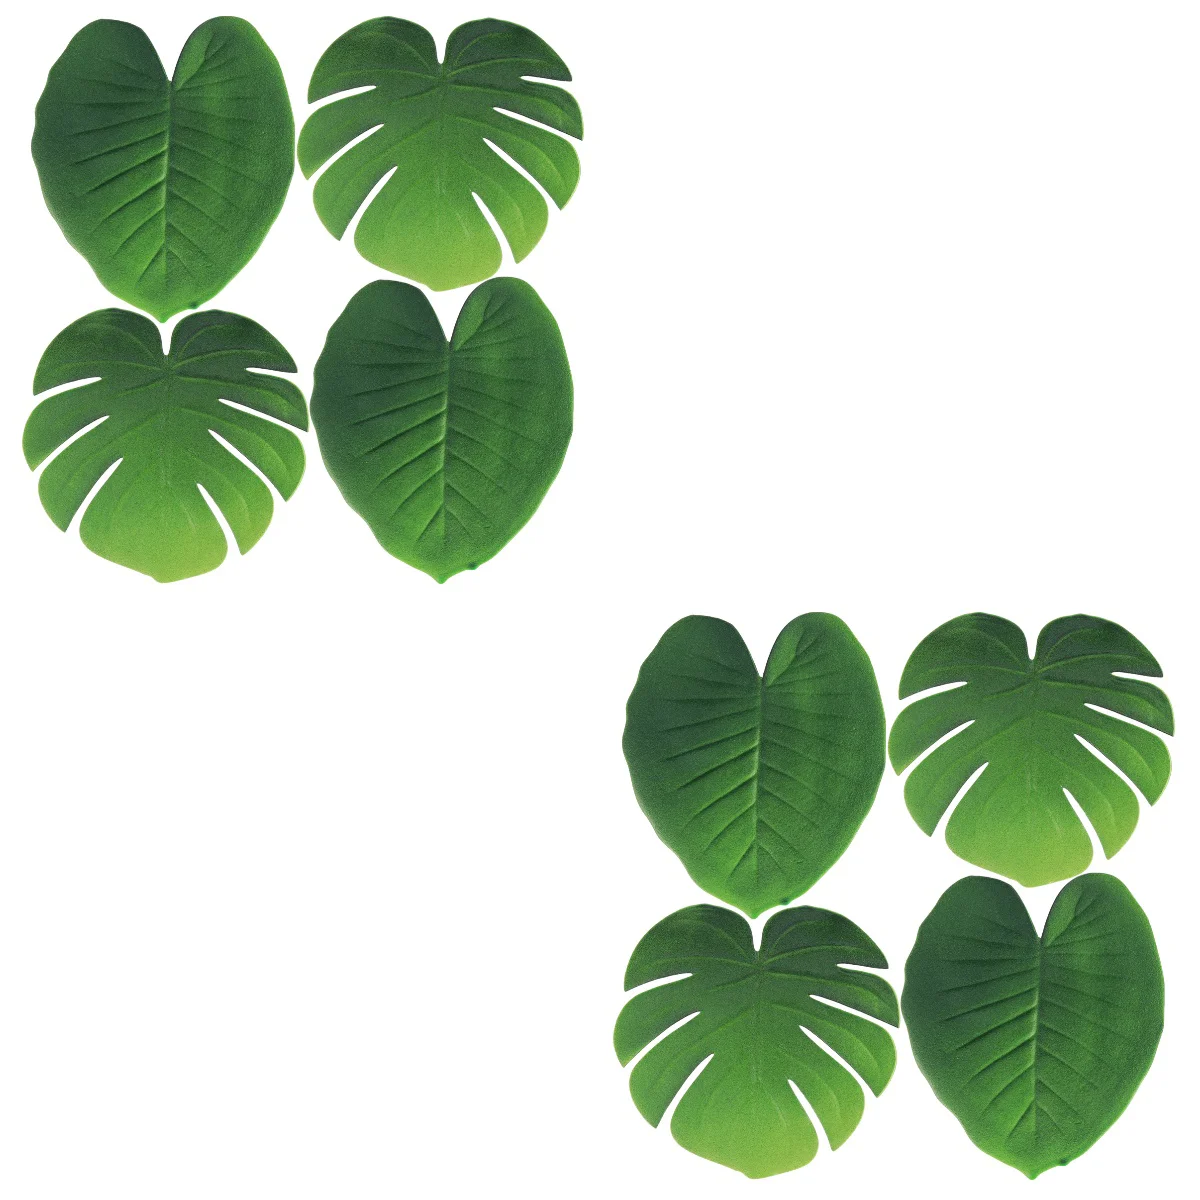 

8 Pcs Coaster Fake Palm Leaves Fashion Placemat Table Mat Banana Leaf Luau Party Decorations Cup Mat